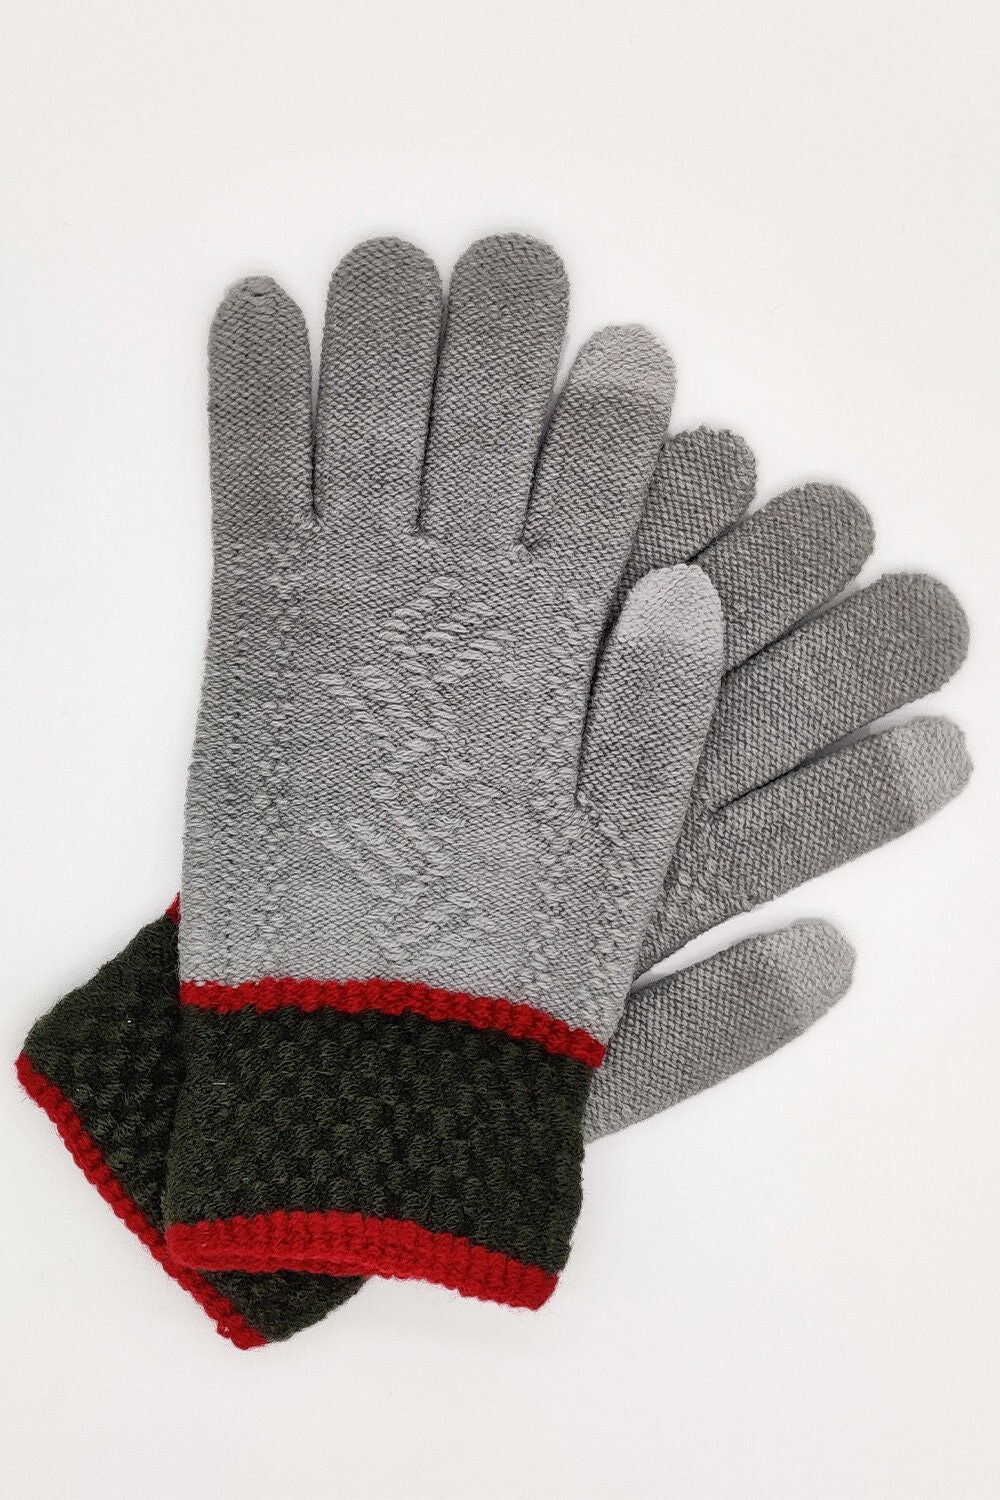 Goddess Leather Gloves With Box Warm Women Gloves Winter Outdoor Sports  Driving Casual Gloves From Friday_store, $35.53